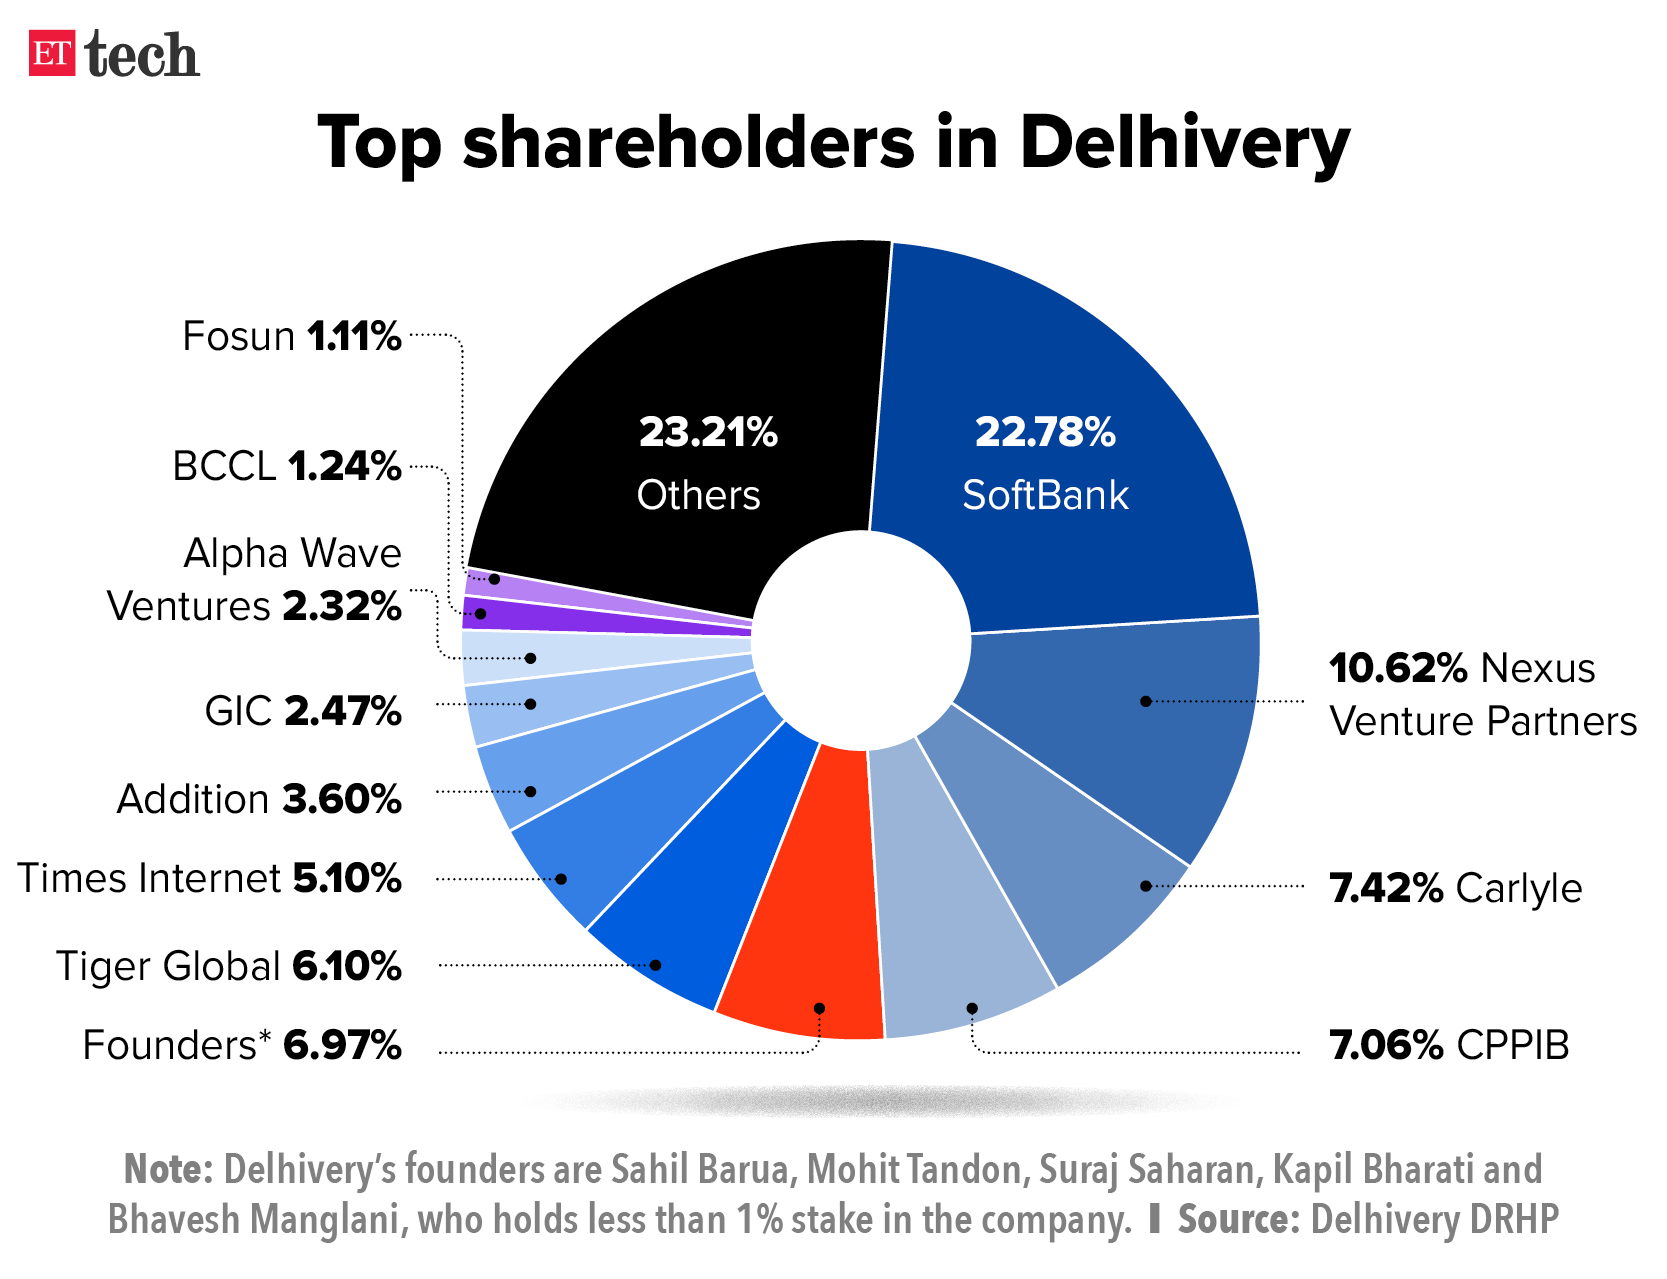 Top shareholders in Delhivery